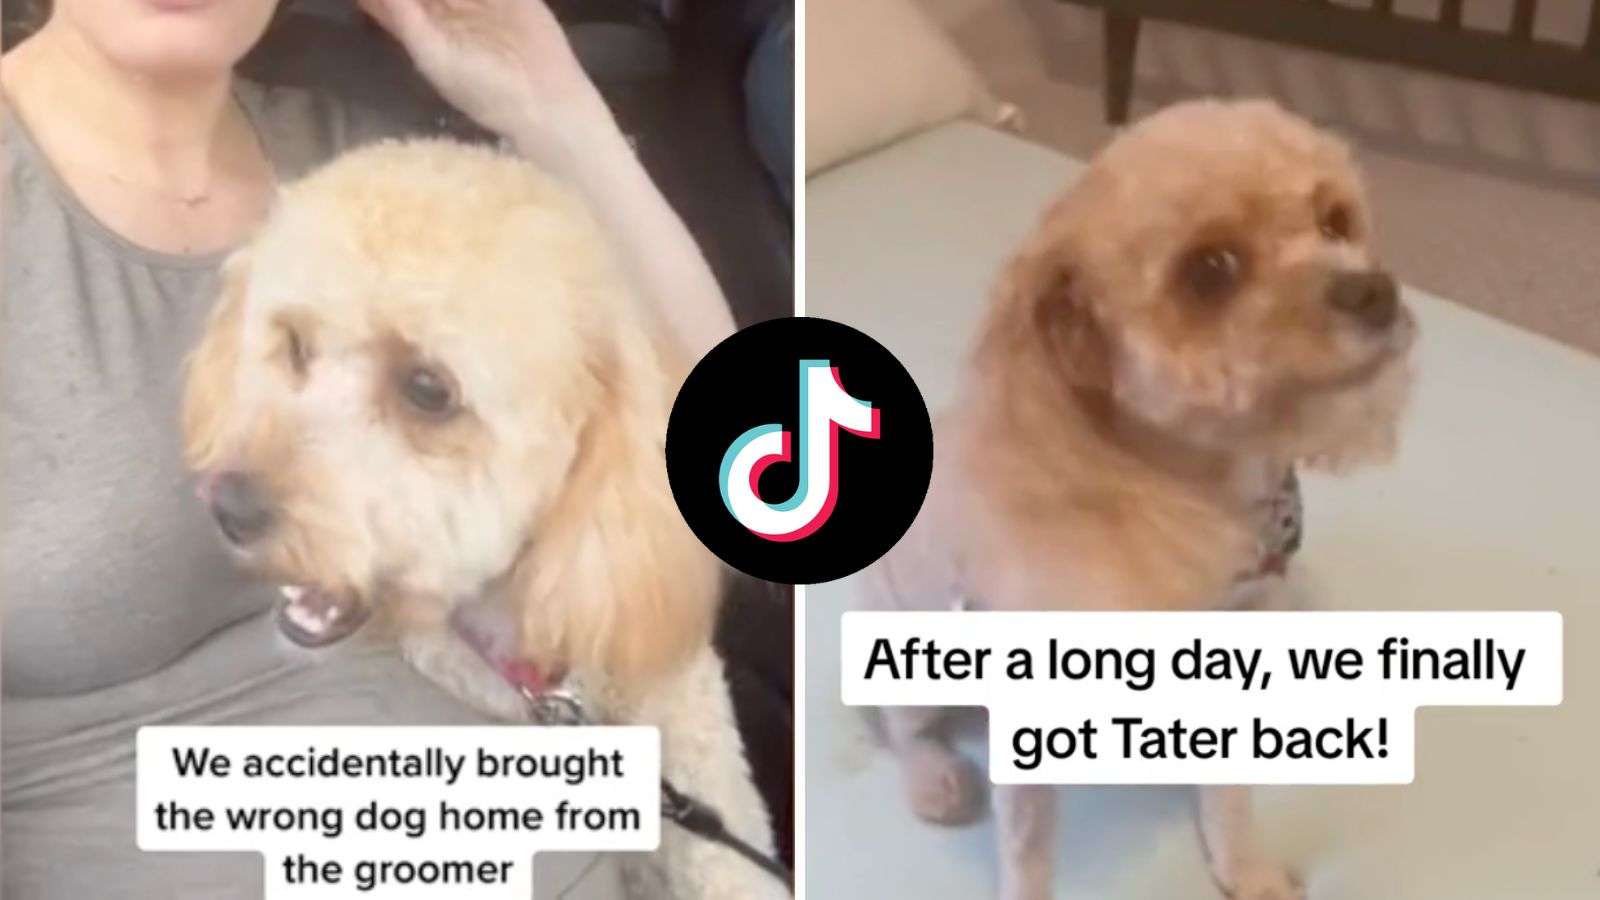 Woman goes viral after accidentally taking wrong dog home from groomer